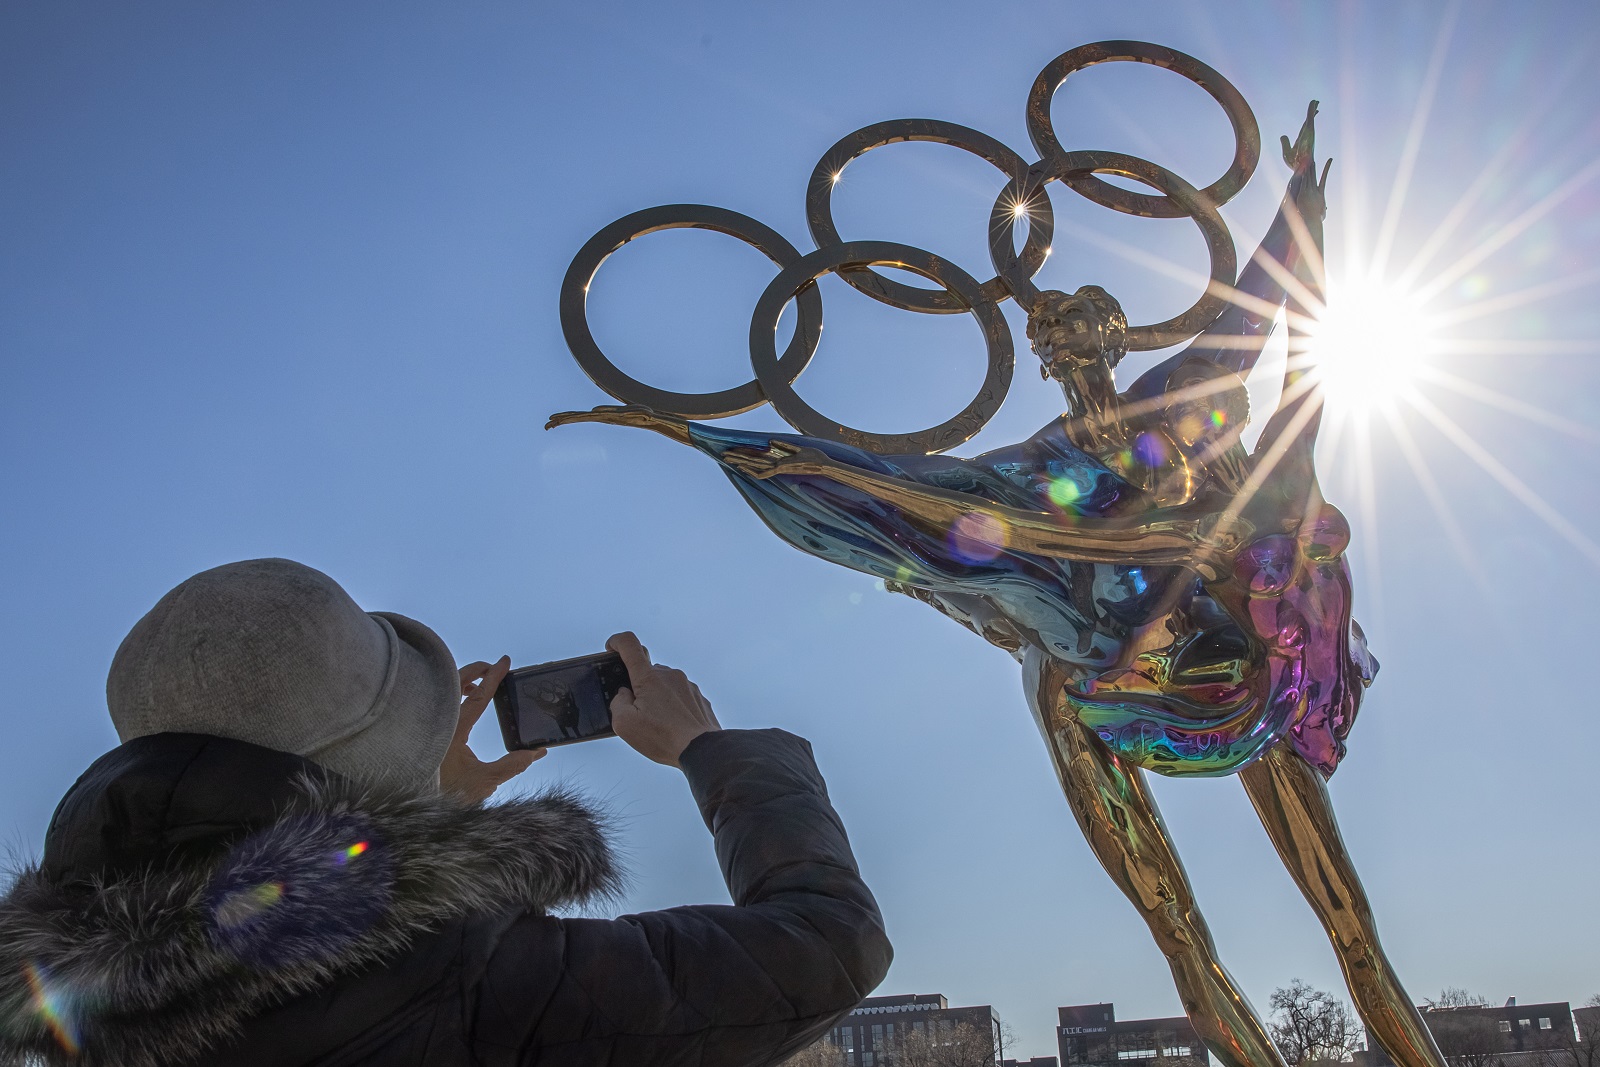 epa09614024 A woman takes photos with her mobile phone of a figure skating sculpture erected for the Beijing 2022 Winter Olympics, at the Shougang Industrial Park, which will be used as a venue for hosting sport and other events during Beijing 2022 Winter Olympics, in Beijing, China, 01 December 2021. According to China's epidemiologist experts, the new Omicron COVID-19 variant, which poses a high risk globally, at this moment wouldn't have a strong impact on China, which is scheduled in two months to host The 2022 Beijing Winter Olympics followed by the Paralympics.  EPA/ROMAN PILIPEY